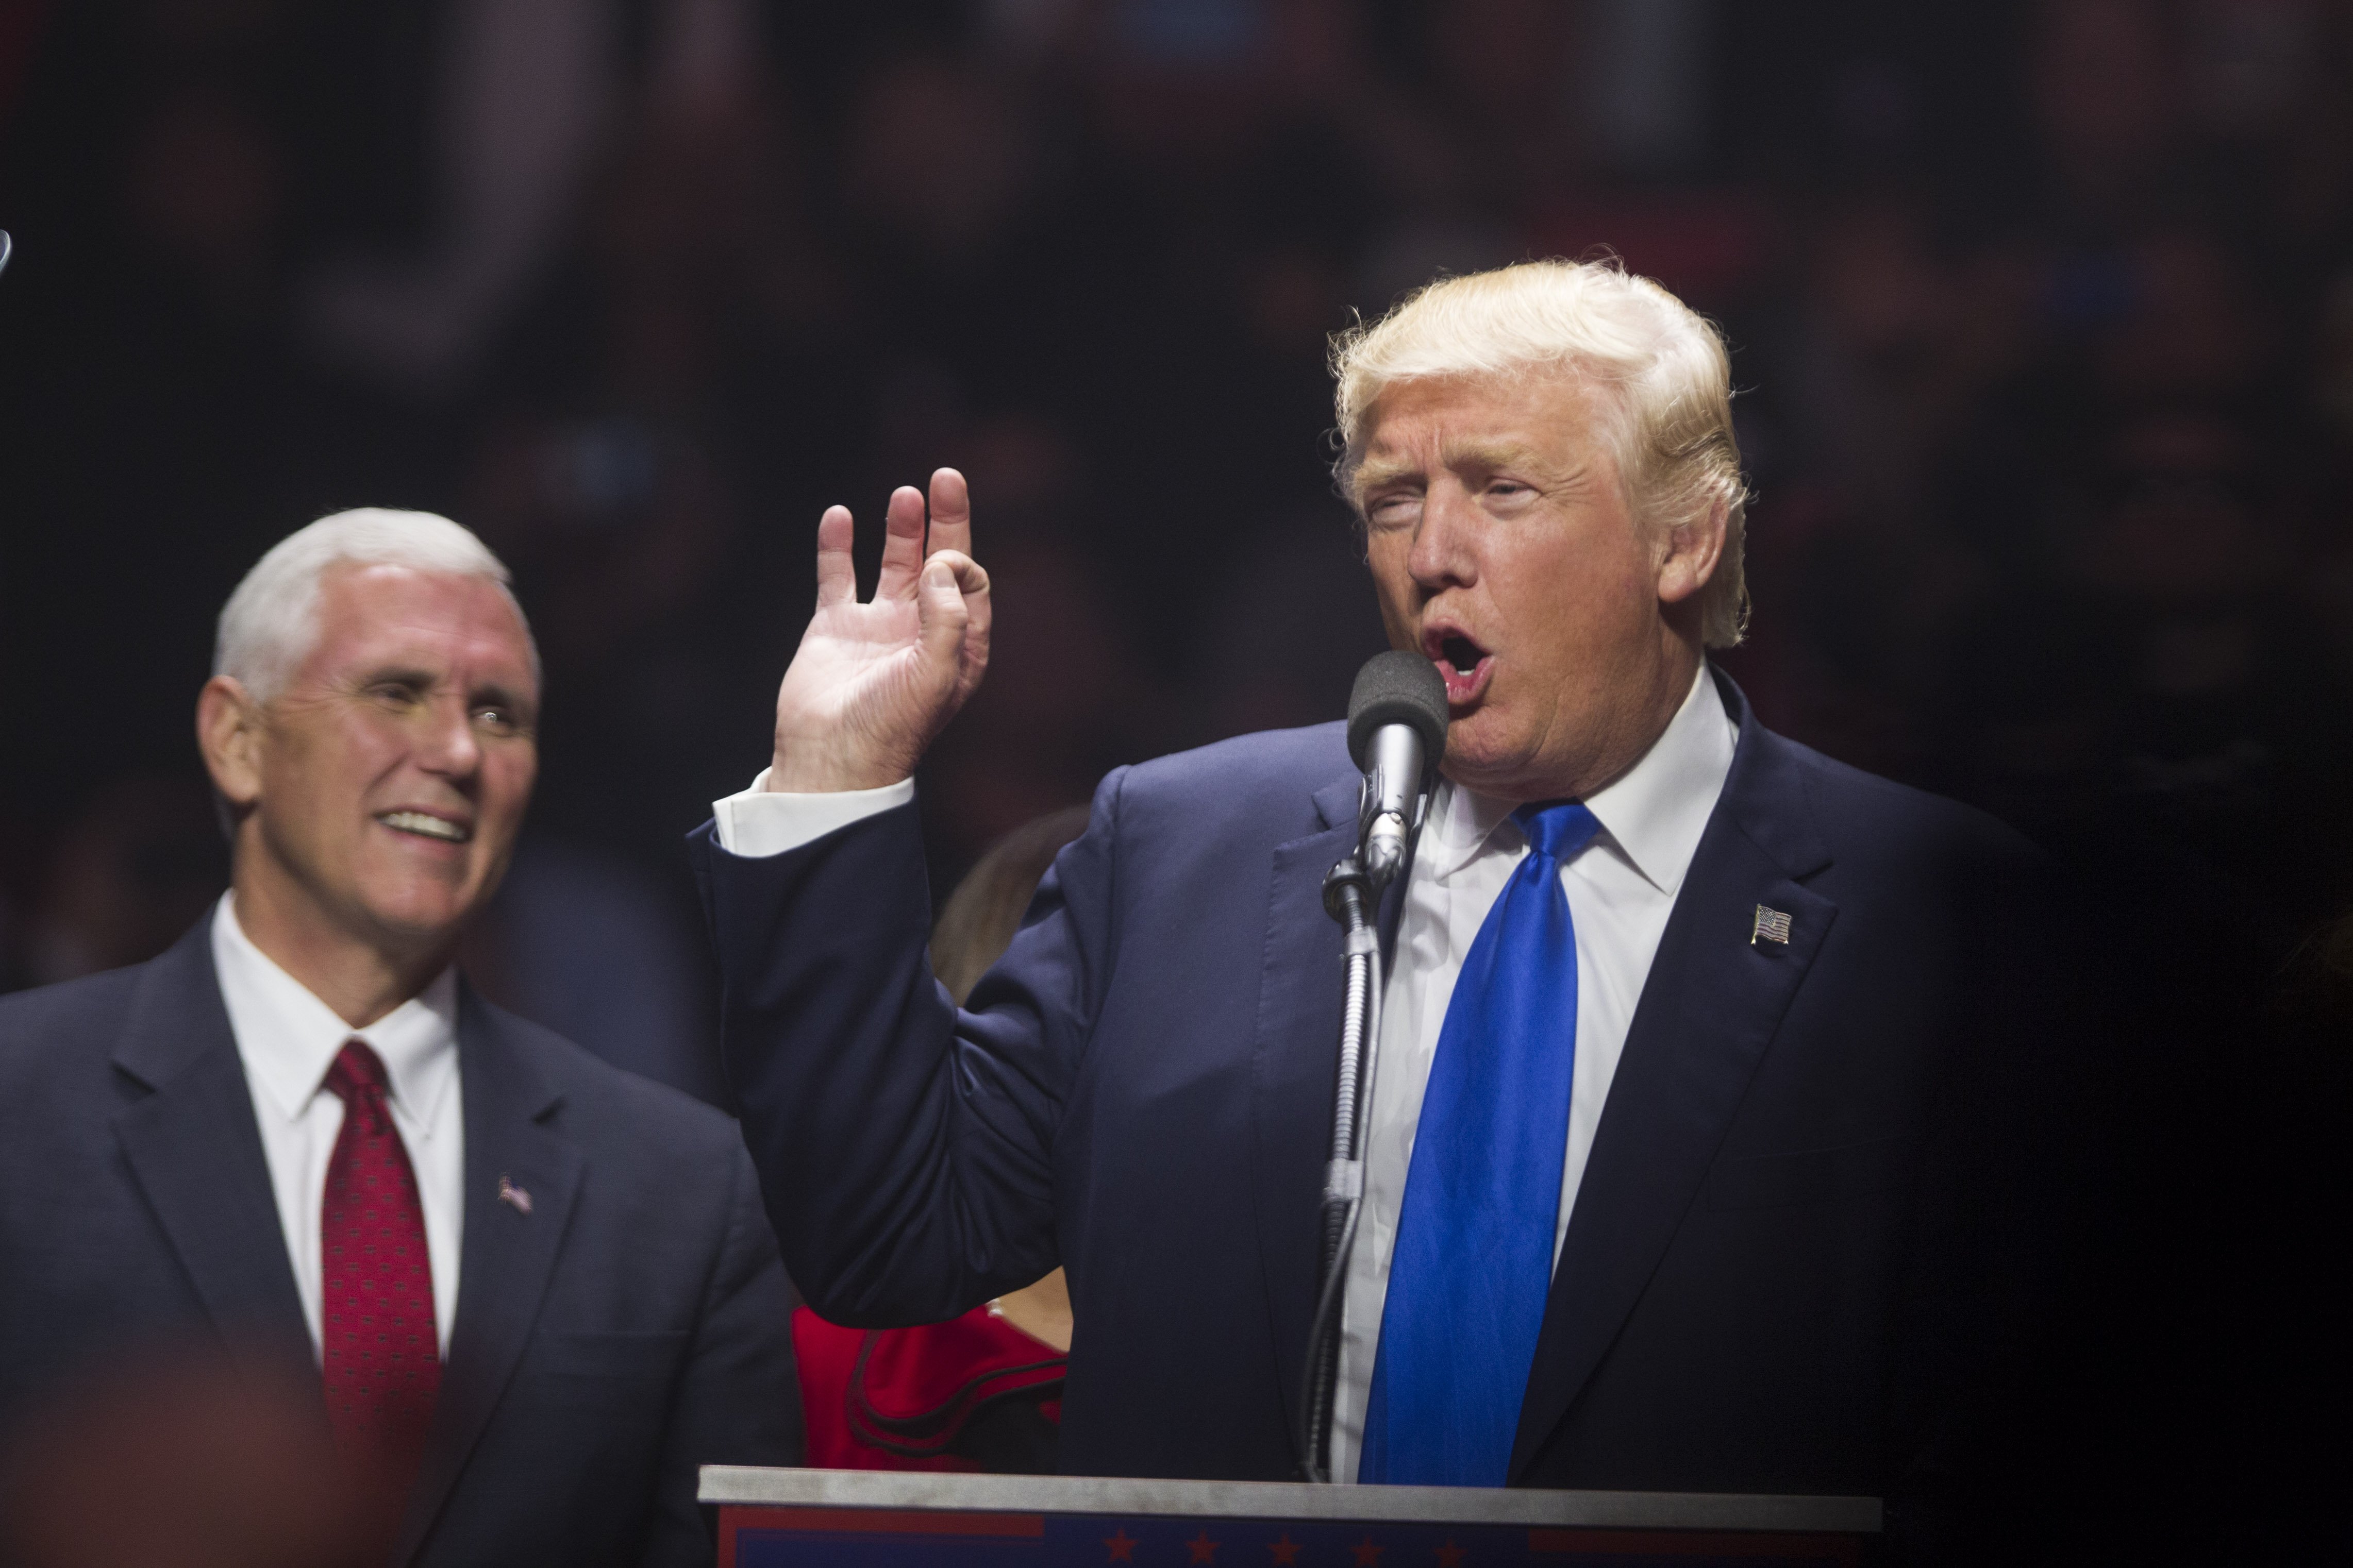 Donald Trump speaks on stage with running mate Indiana Governor Mike Pence during a rally at the SNHU Arena on November 7, 2016 in Manchester, New Hampshire.